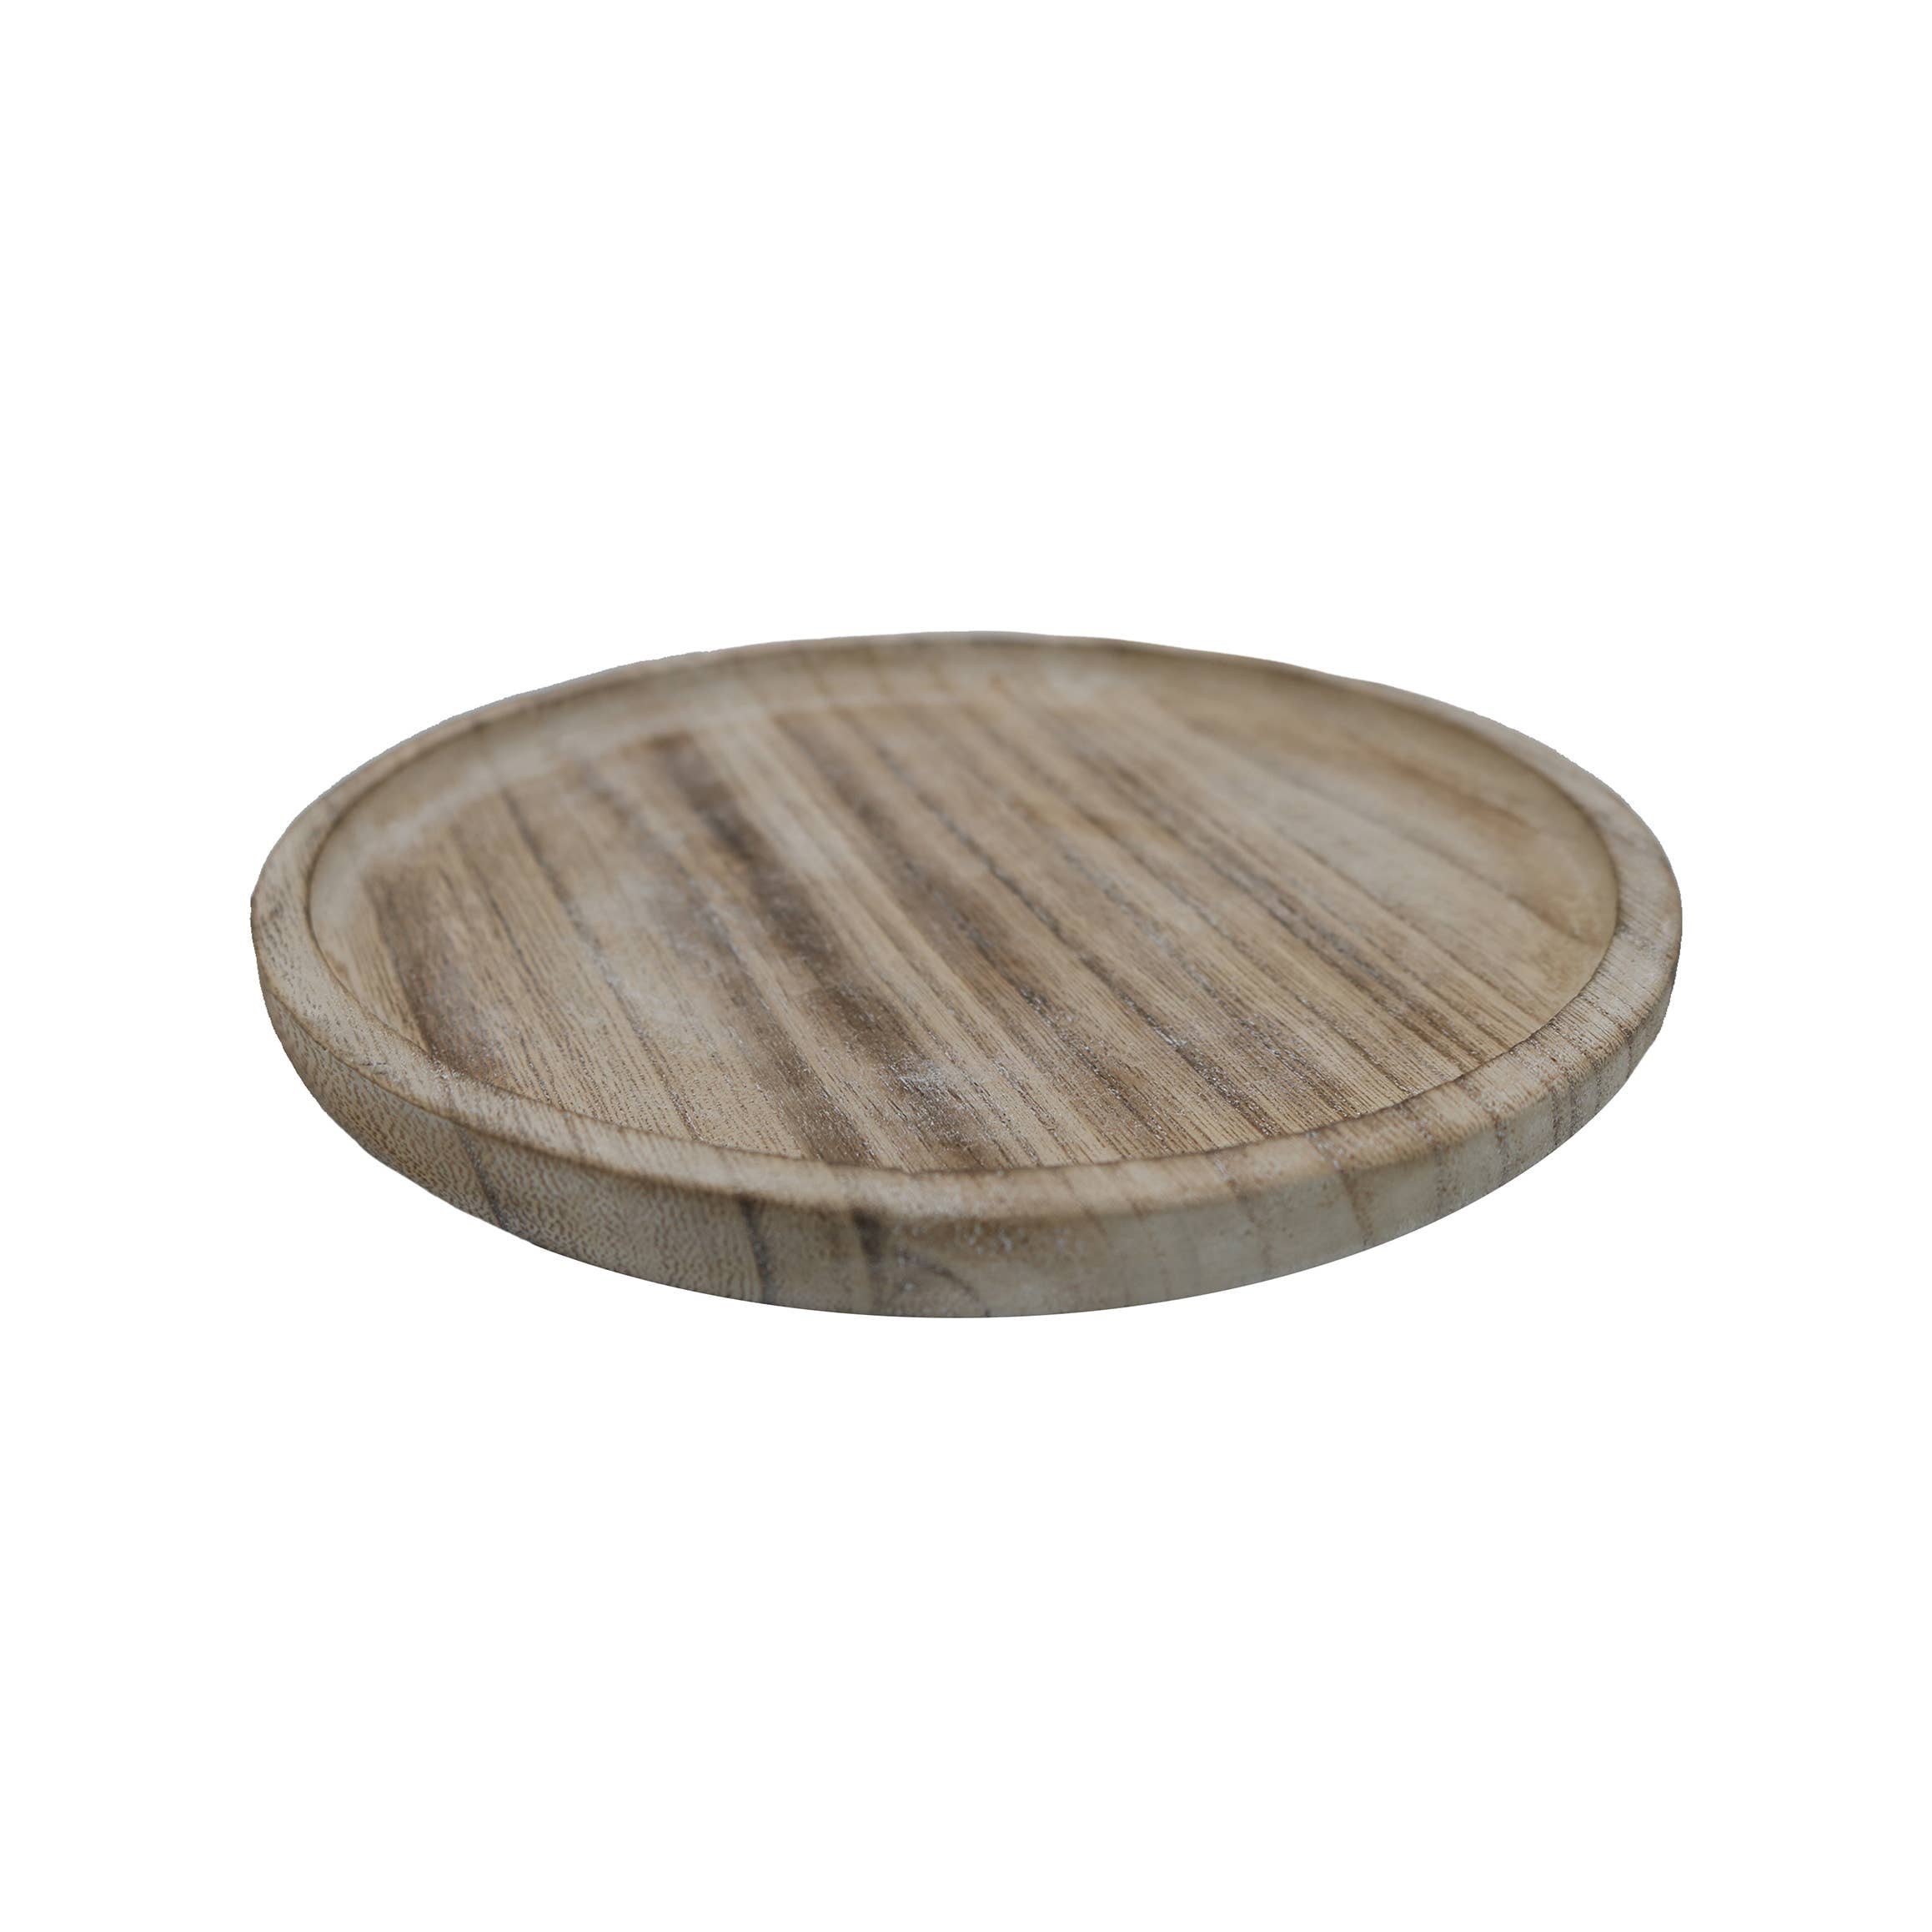 Round Wood Tray - Rustic - 7x7"